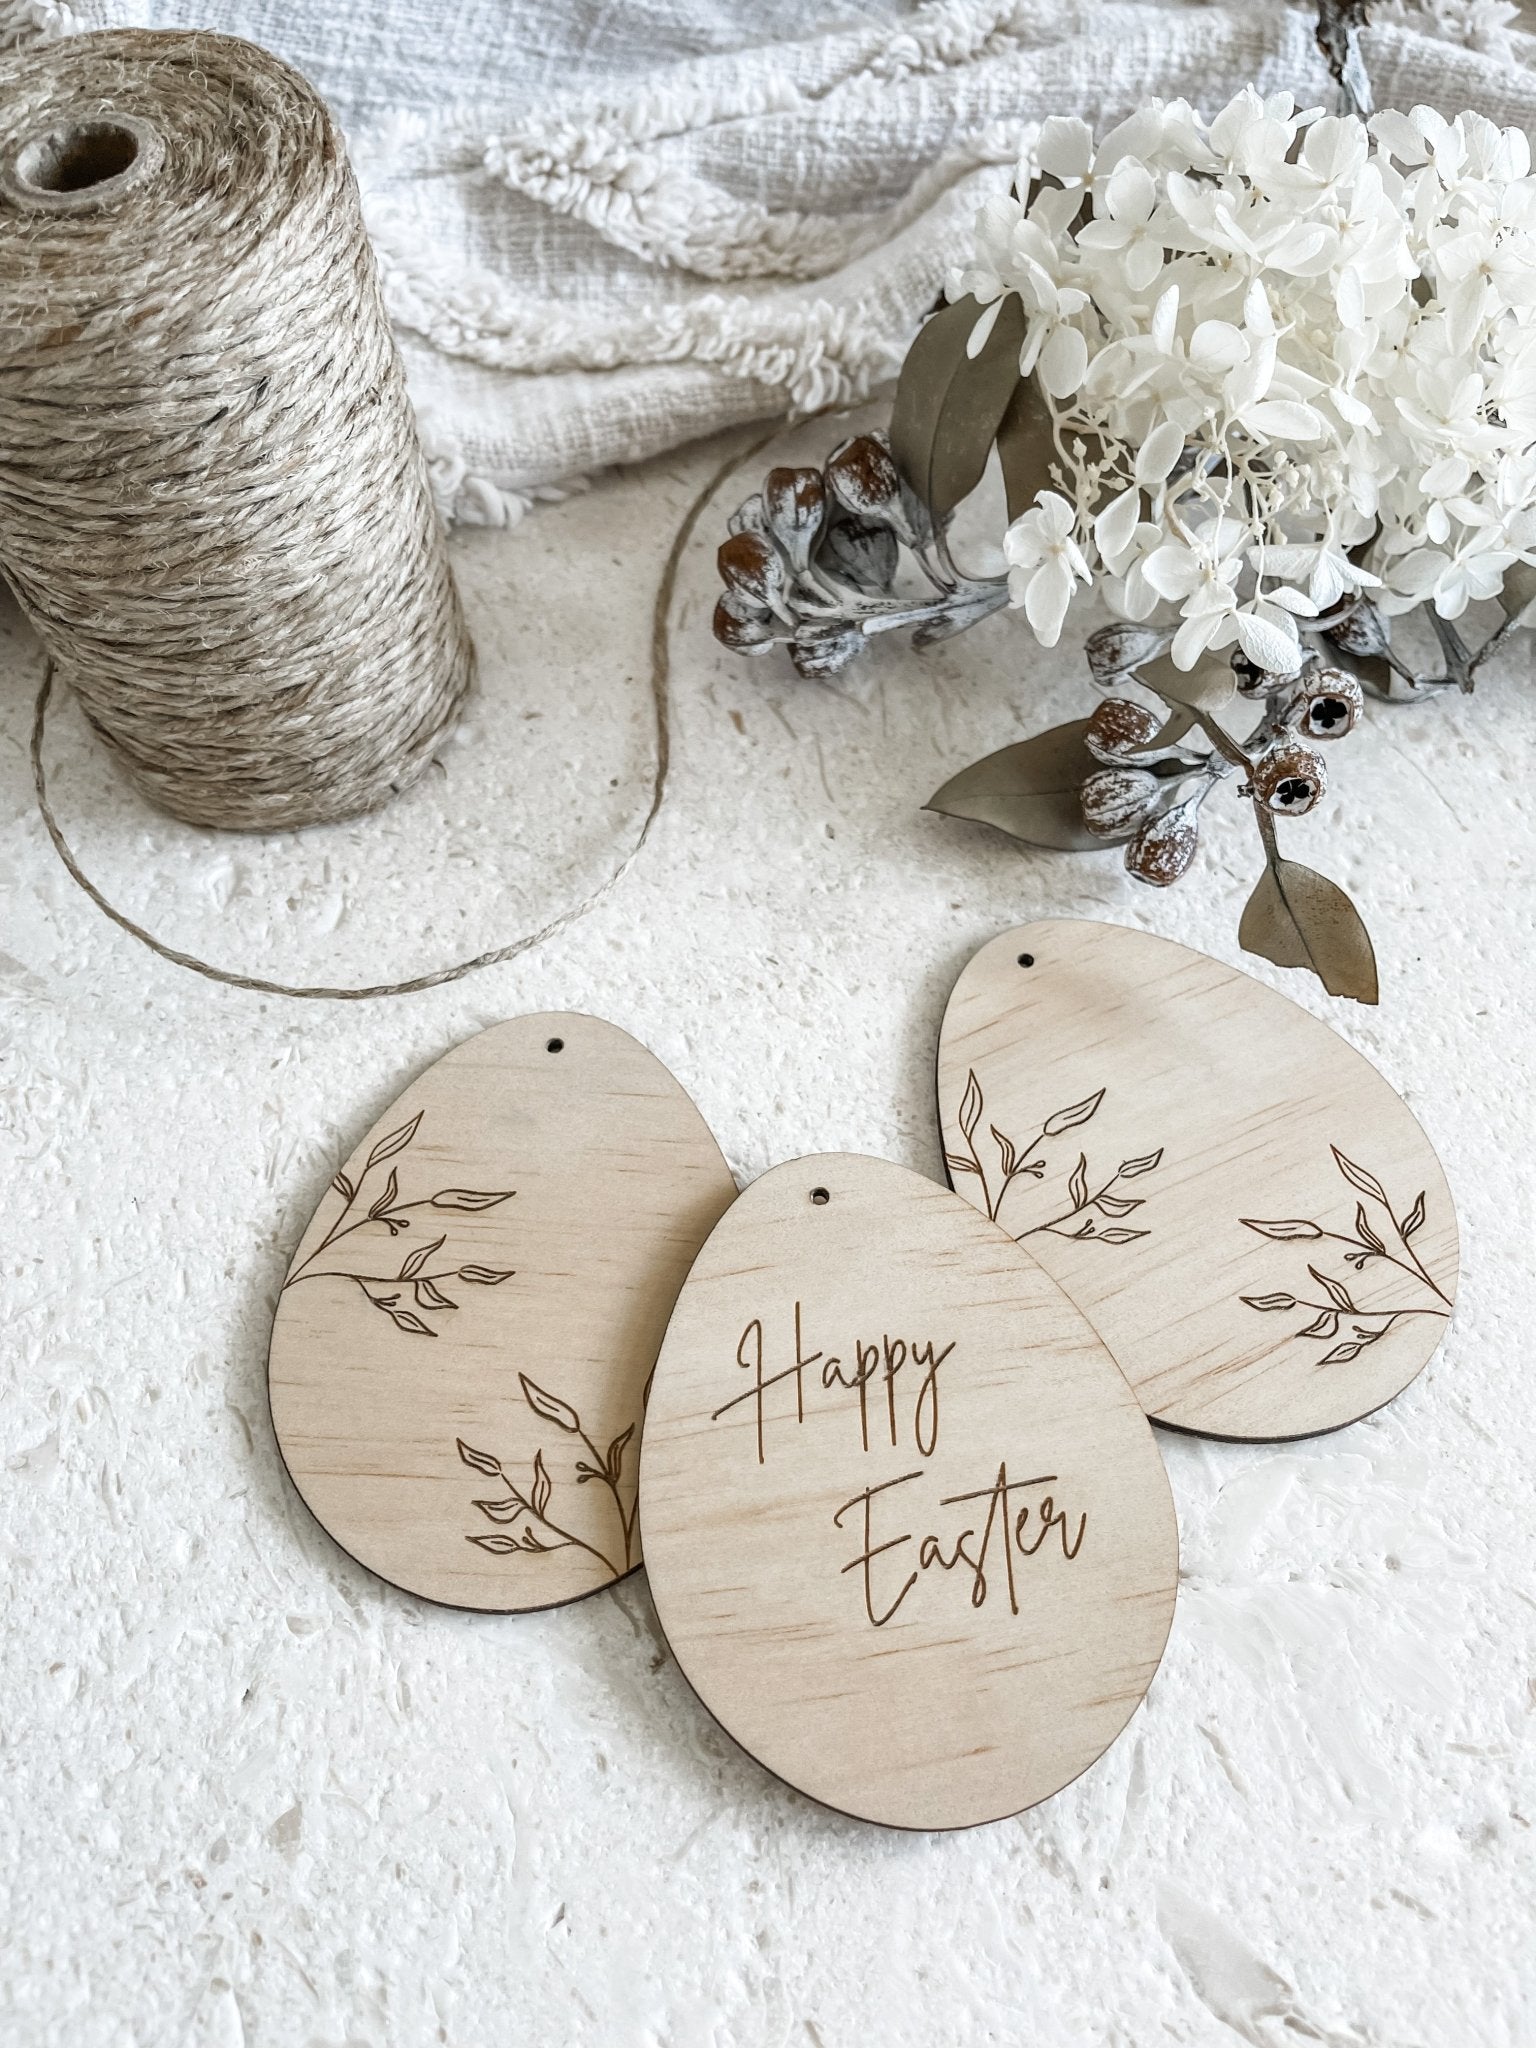 Little Leaf Decorative Easter Egg - The Humble Gift Co.